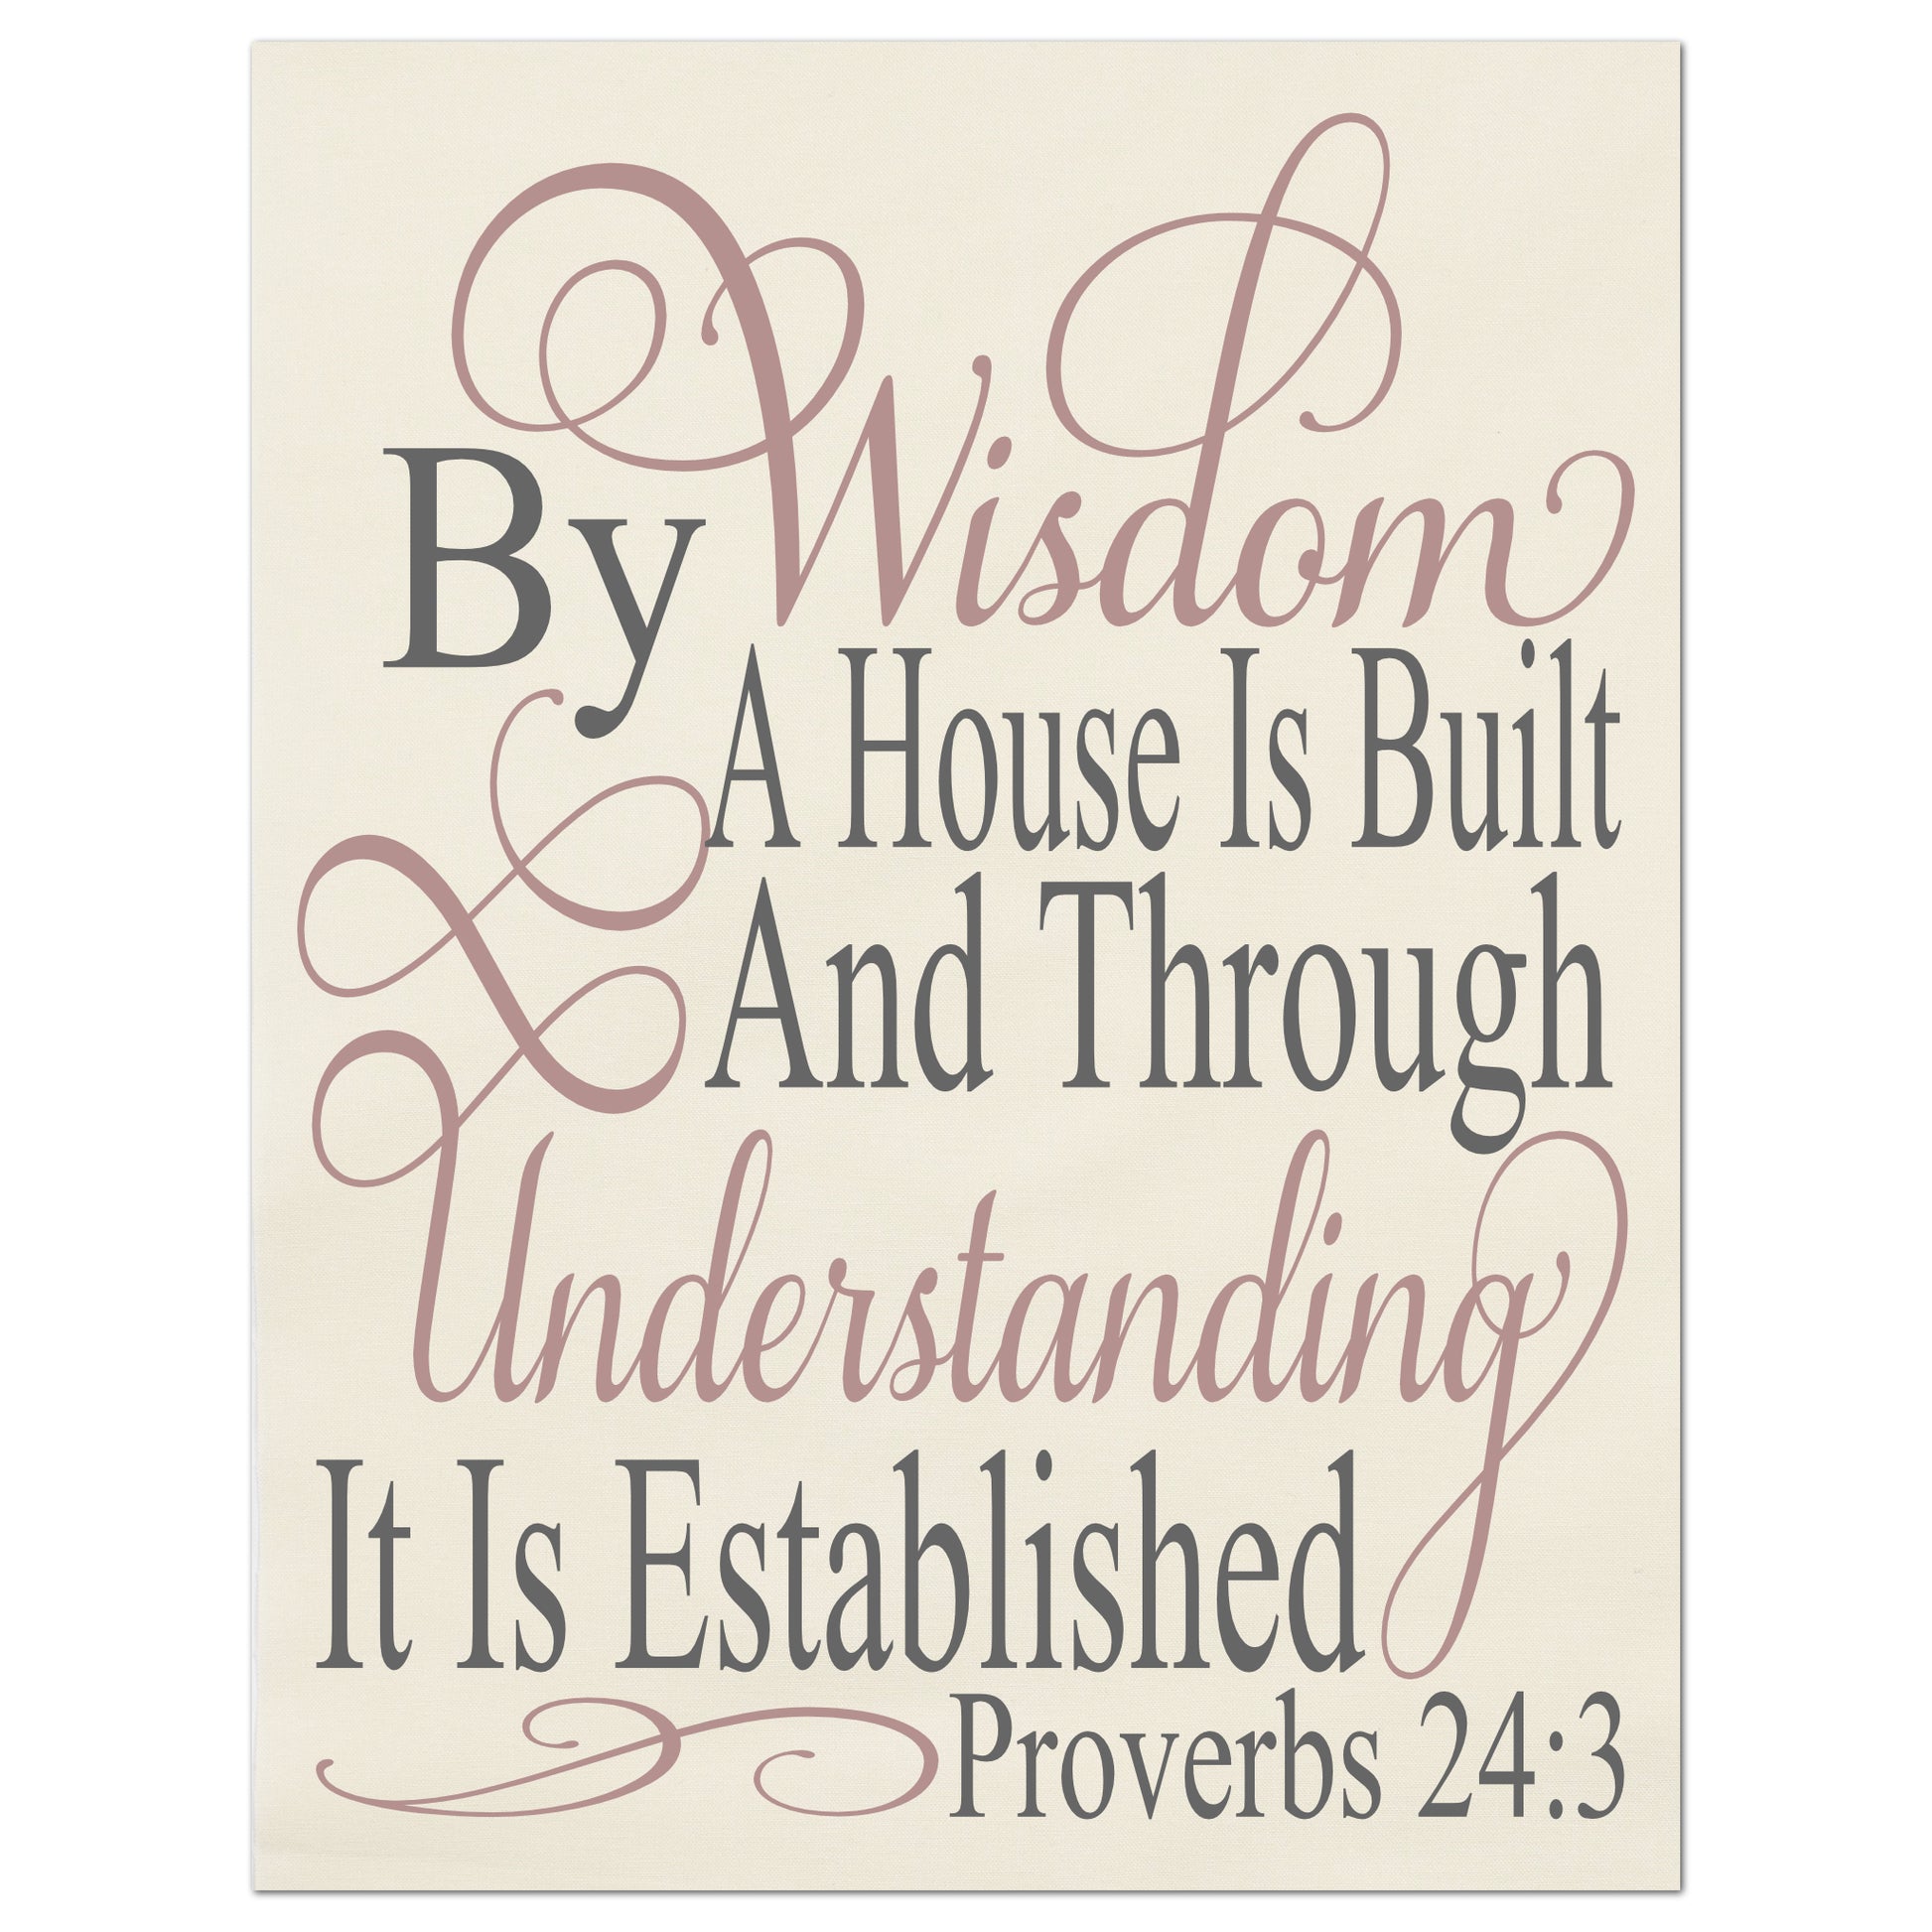 By wisdom a house is built and through understanding it is established. - Proverbs 24 3, Fabric Panel Print, Scripture Fabric, Religious, Bible Verse Wall Art